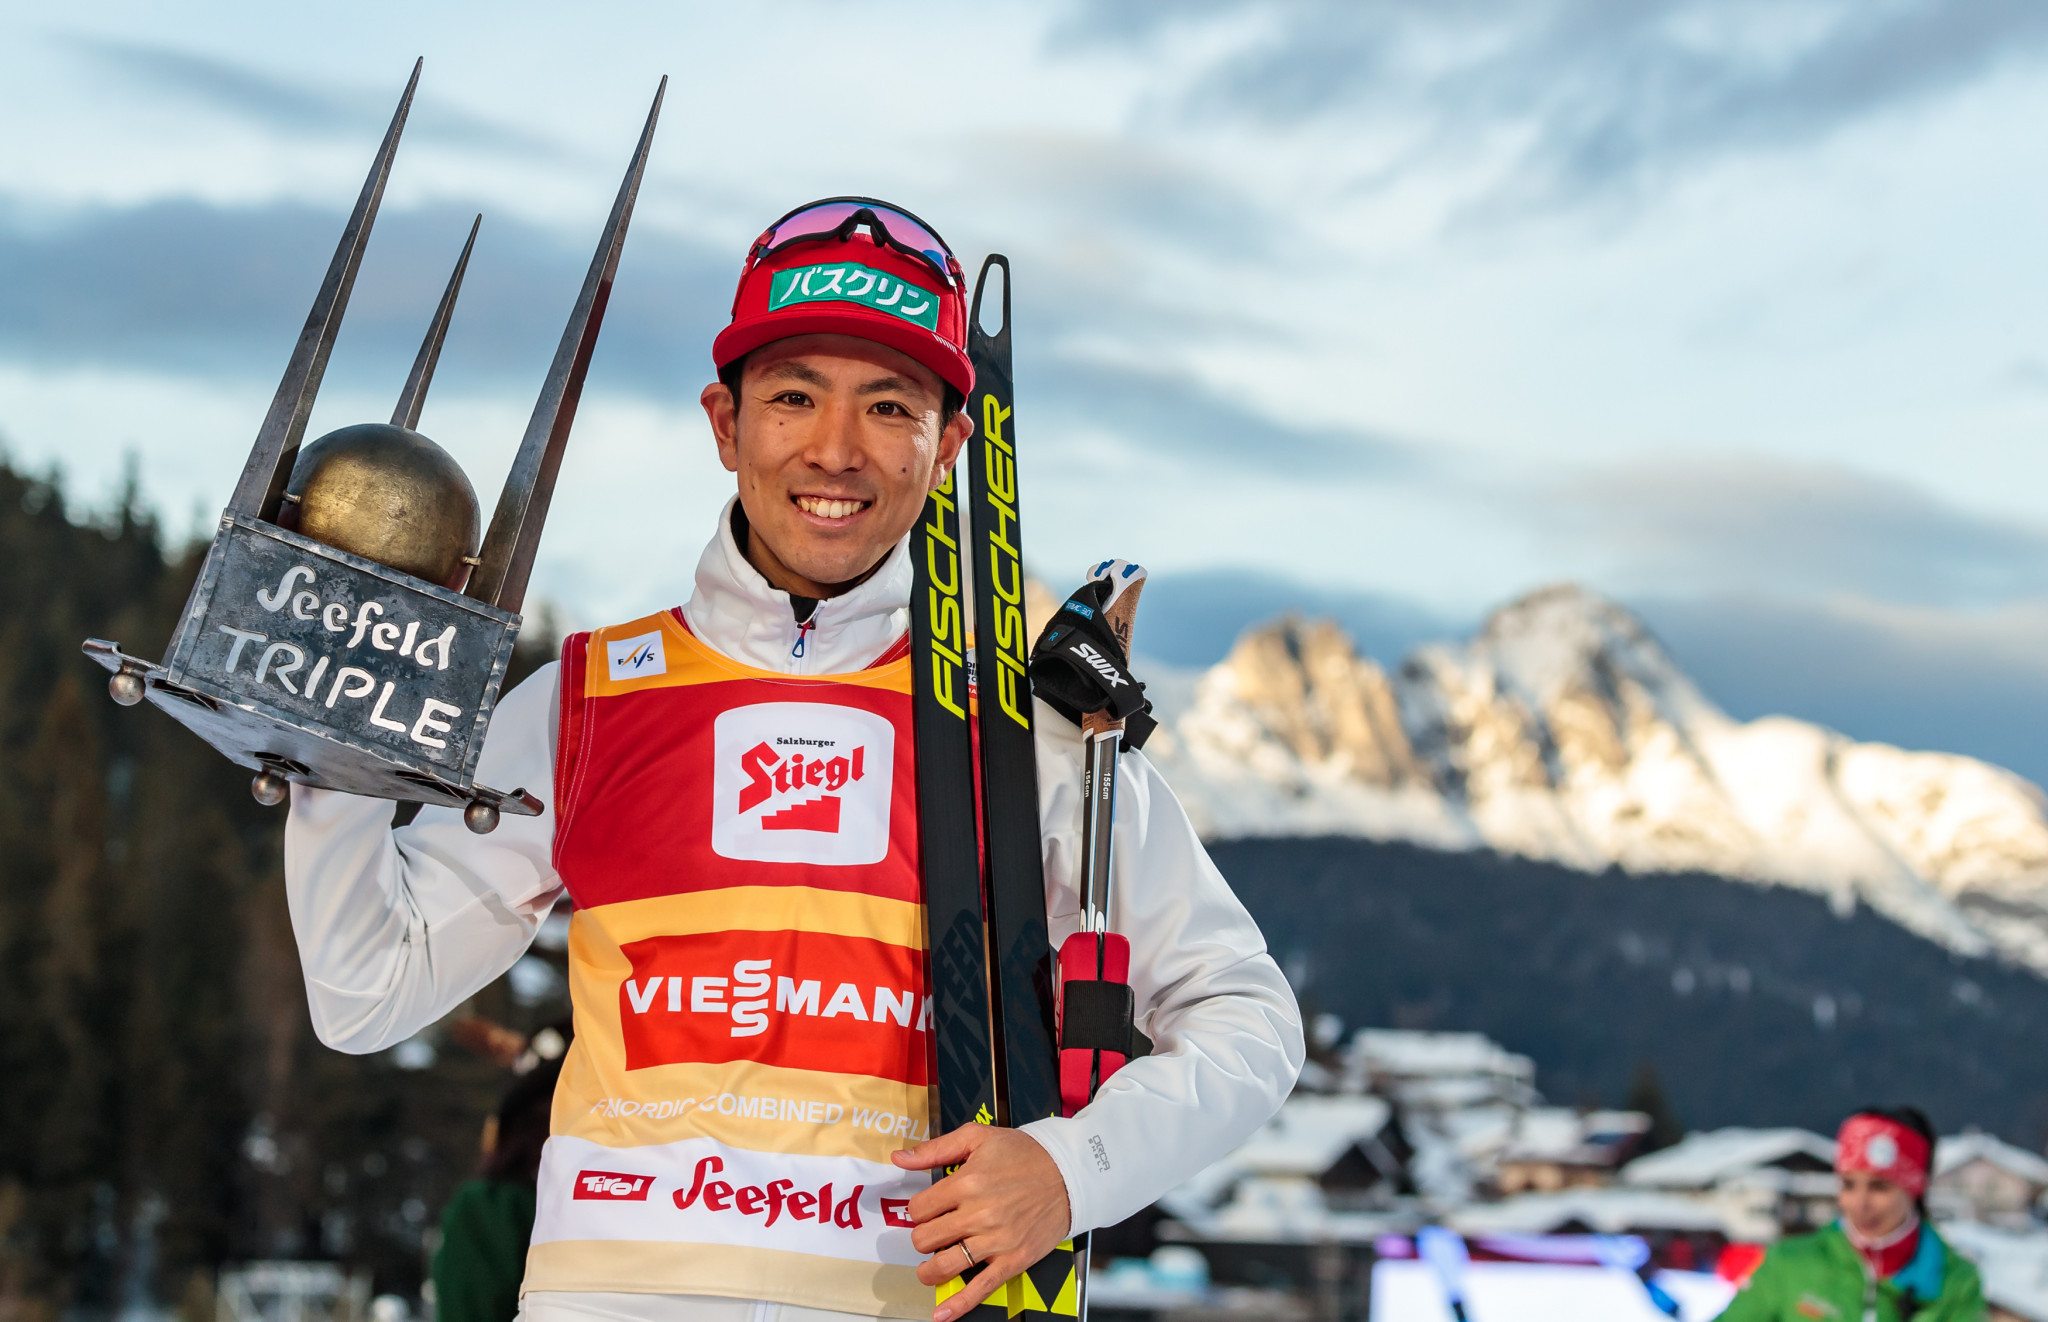 Akito Watabe will be the star attraction on home snow after winning the Seefeld Triple ©Getty Images